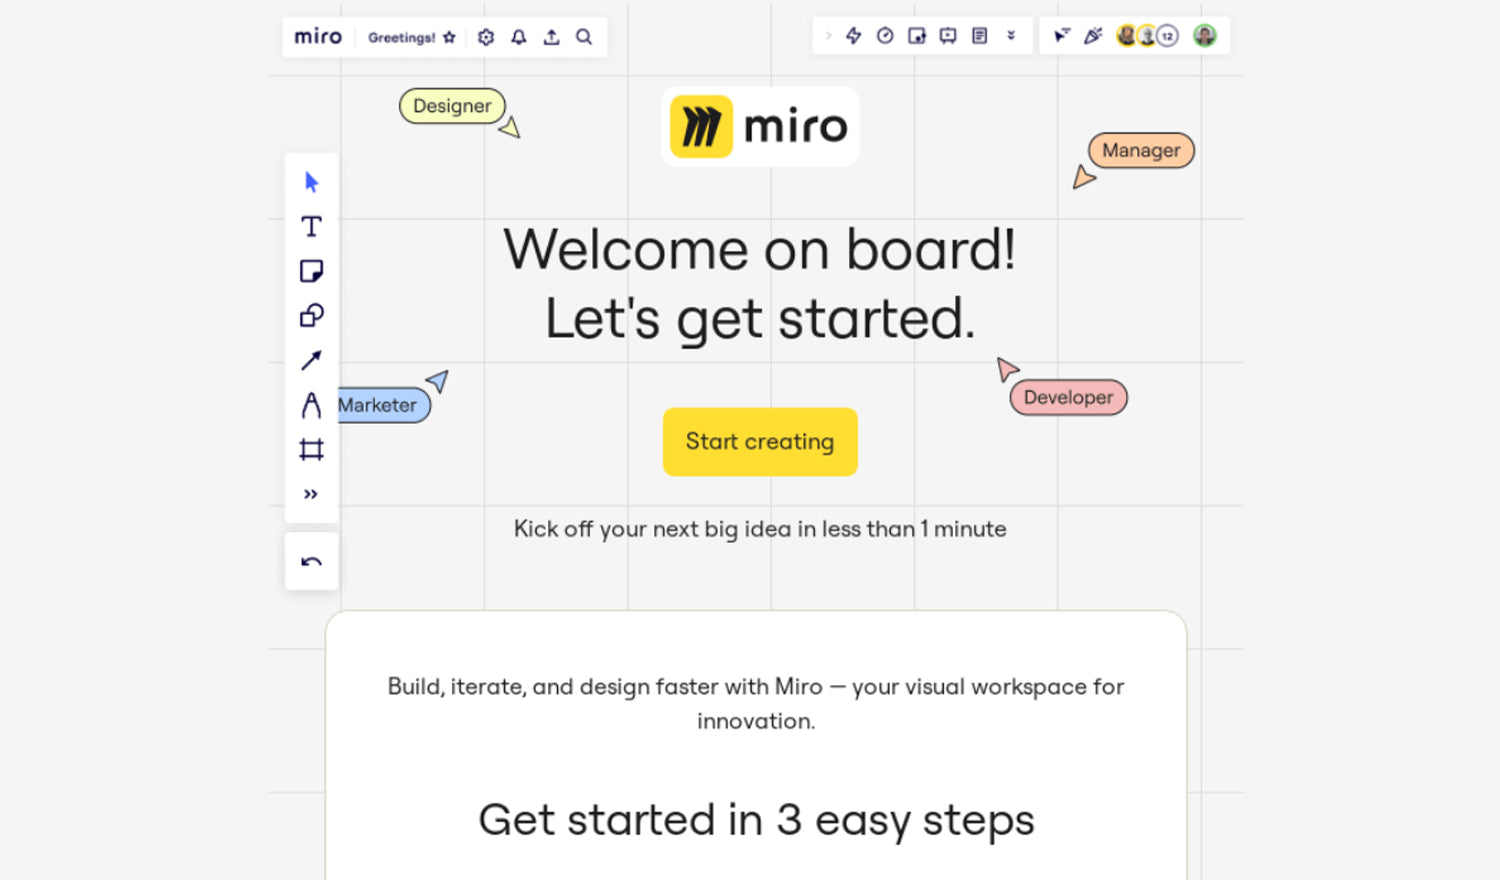 An example of a welcome email sent by Miro, helping users get started in 3 easy steps.